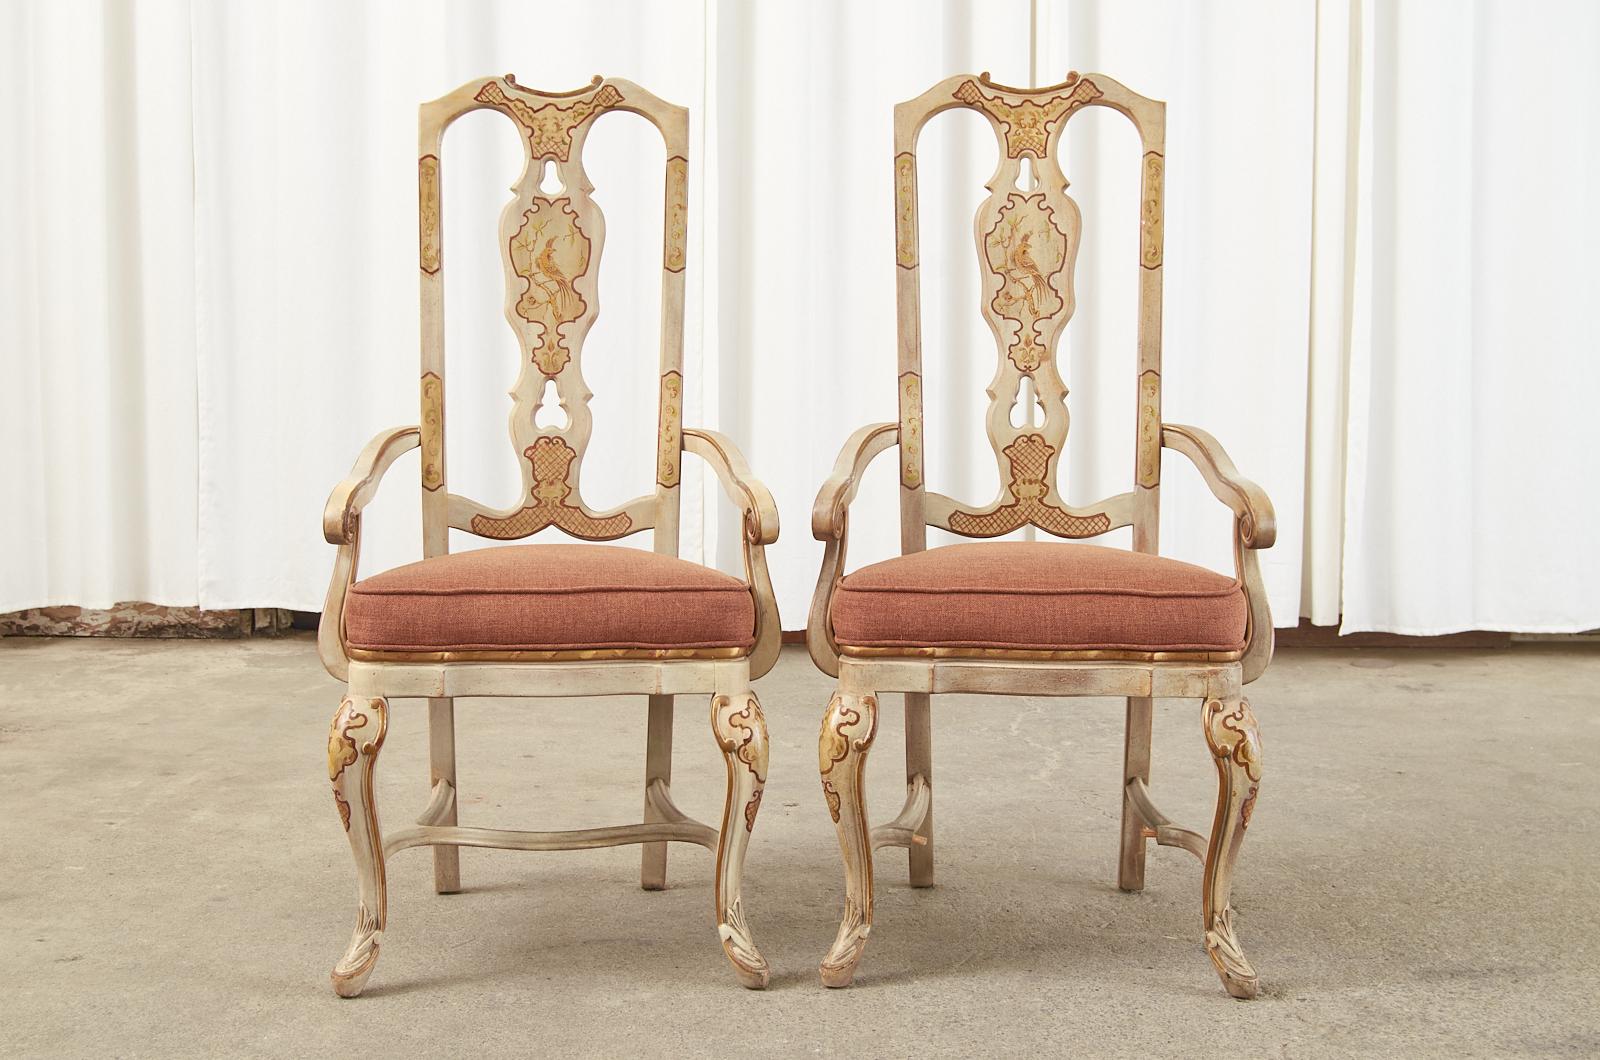 Lacquered set of eight dining chairs made in the English Queen Anne style featuring chinoiserie decorations. The set consists of two armchairs measuring 22 inches wide and six side chairs. The hardwood chair frames have a parcel gilt accents and an